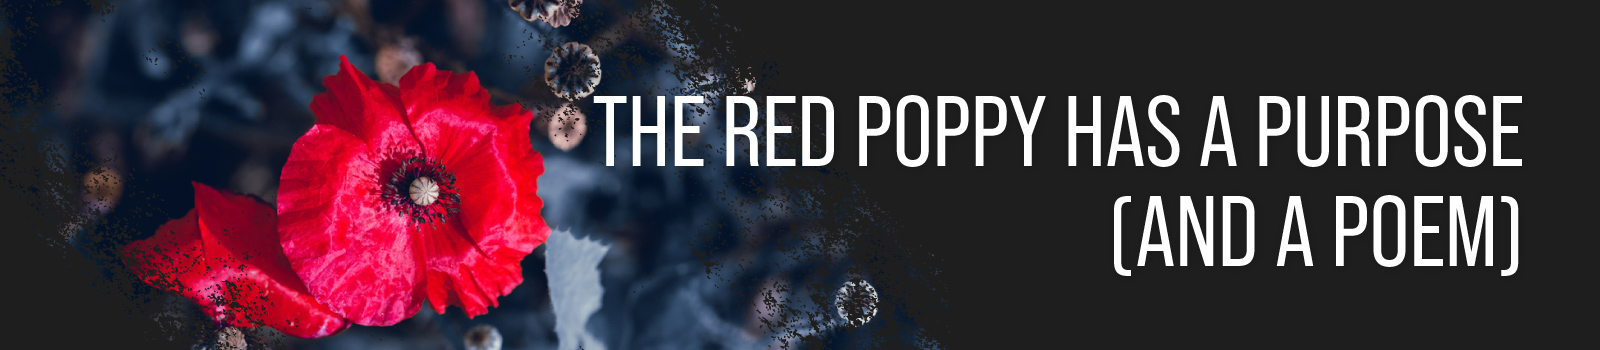 The Red Poppy Has a Purpose (and a Poem)